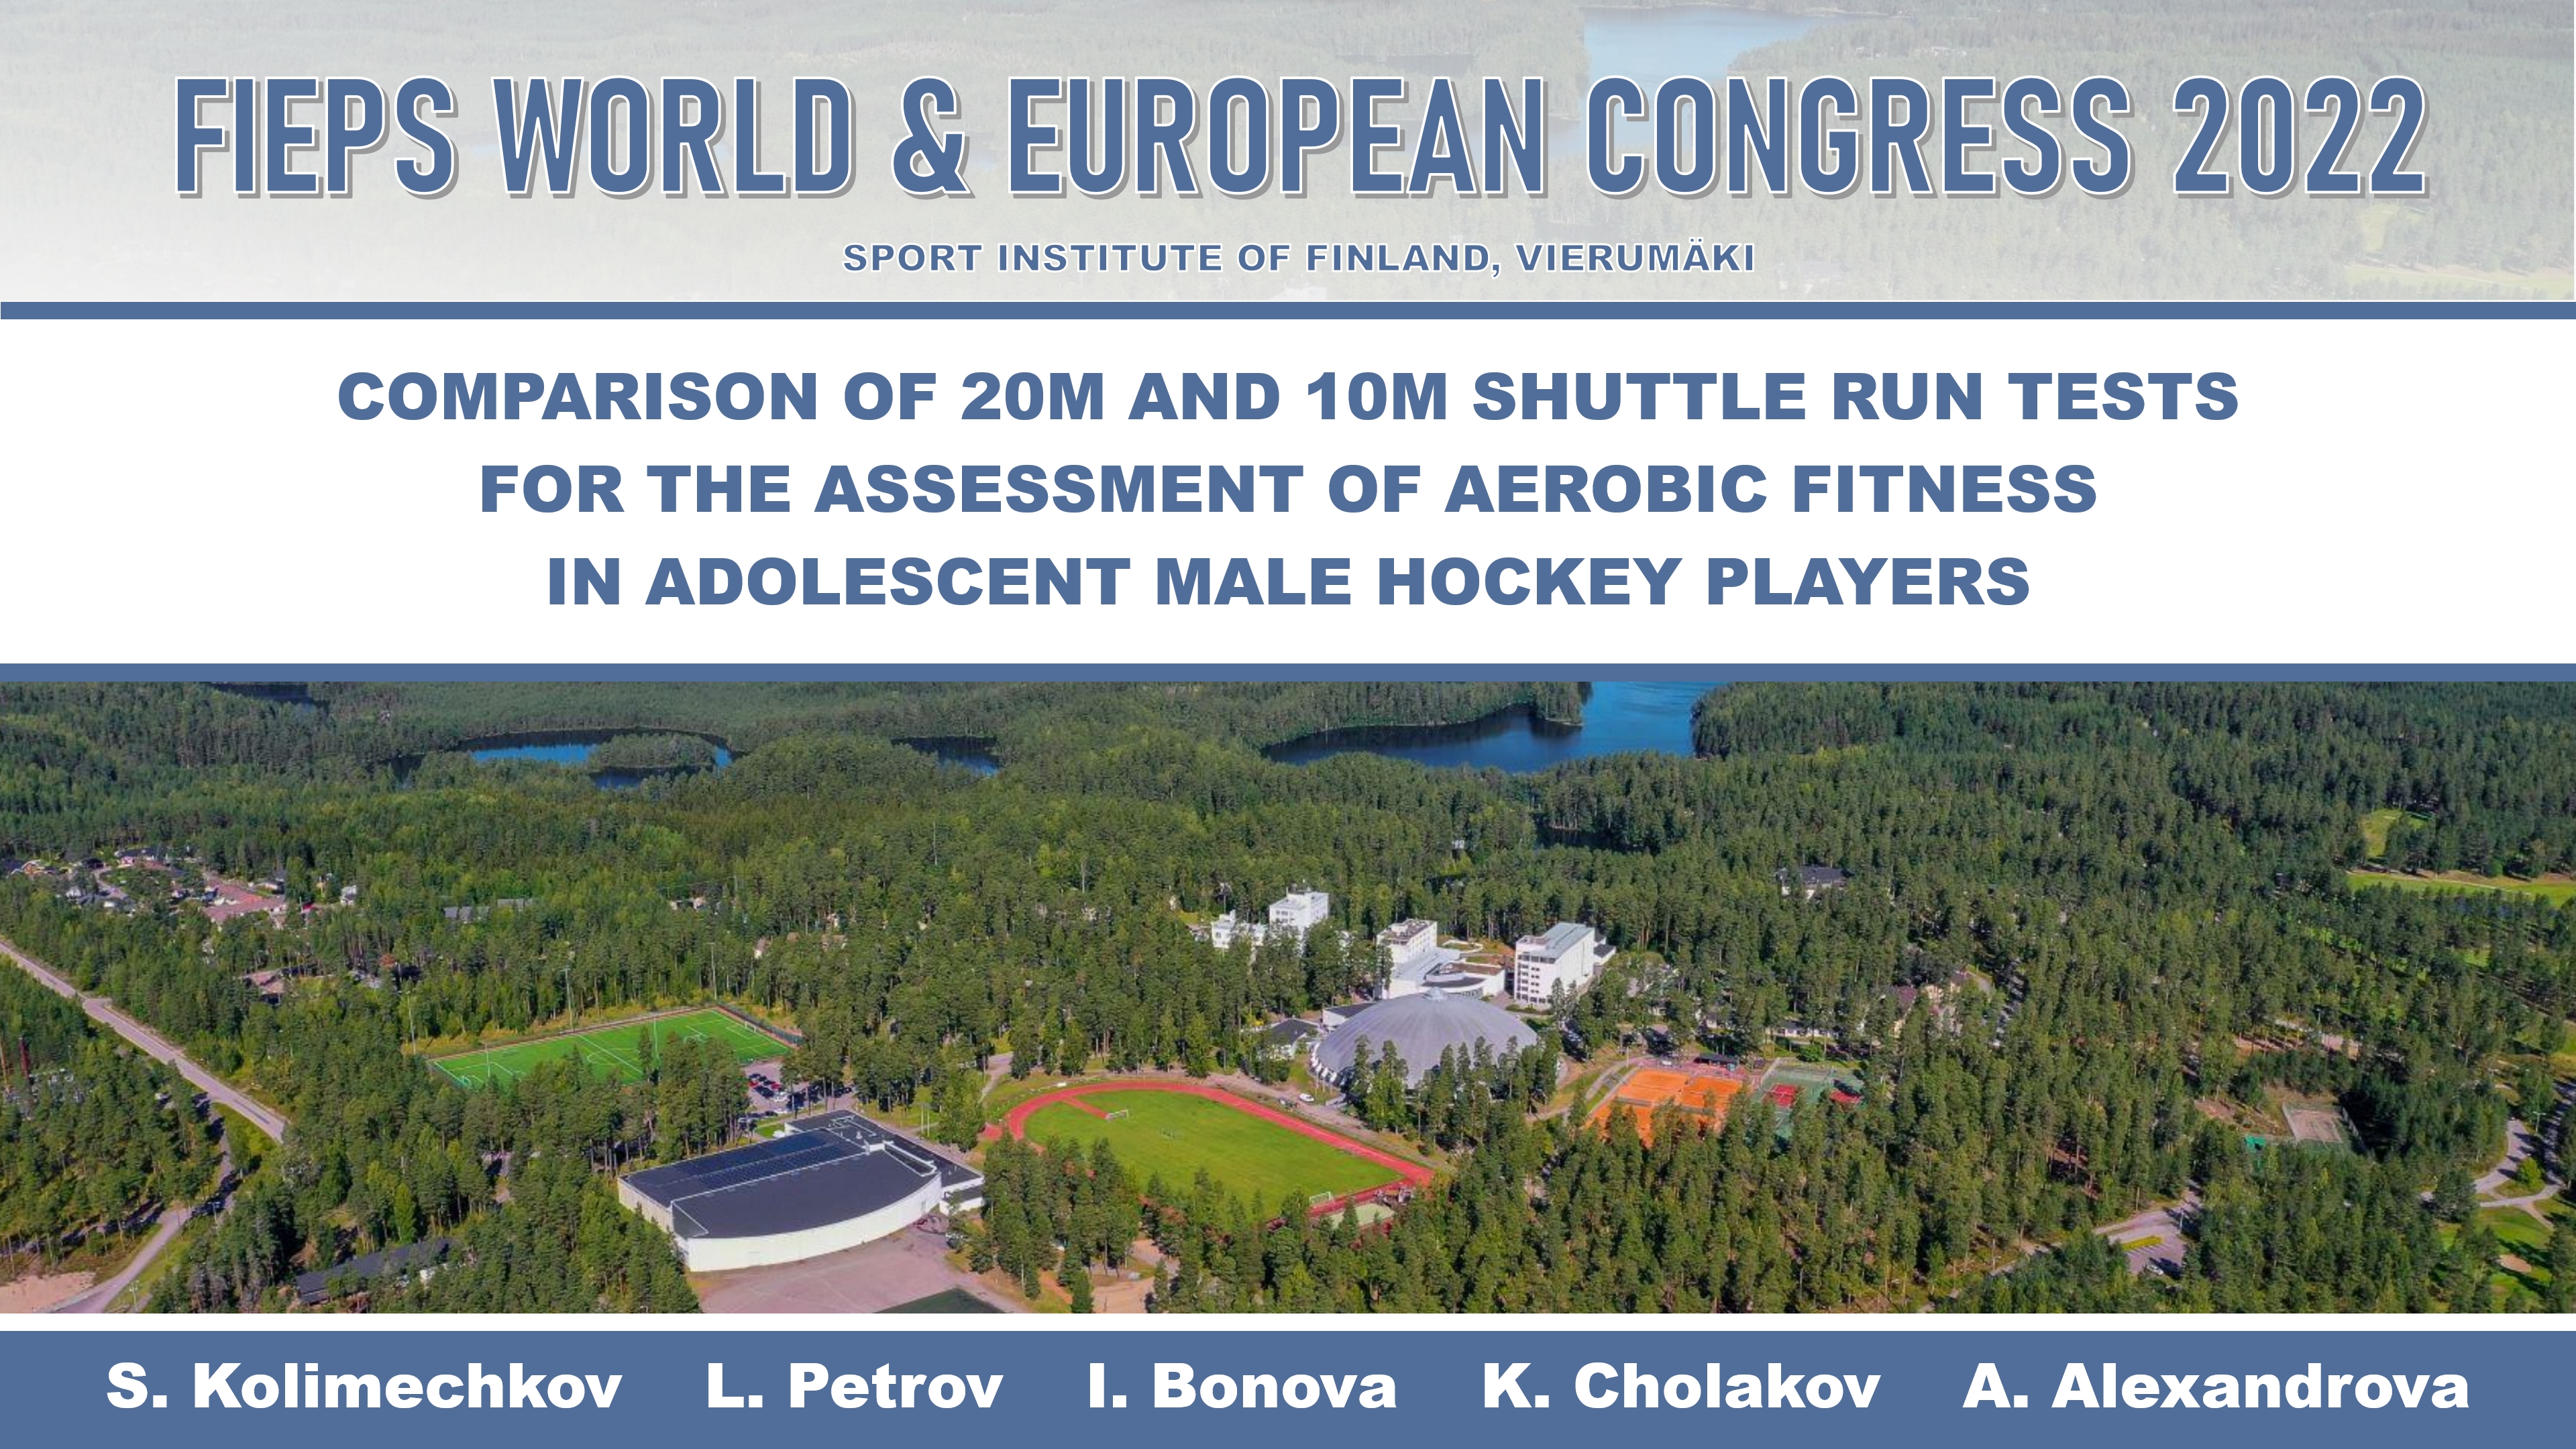 Comparison of 10m and 20m shuttle run tests for the assessment of aerobic fitness in adolescent male hockey players at the FIEPS Congress in Vierumaki 2022